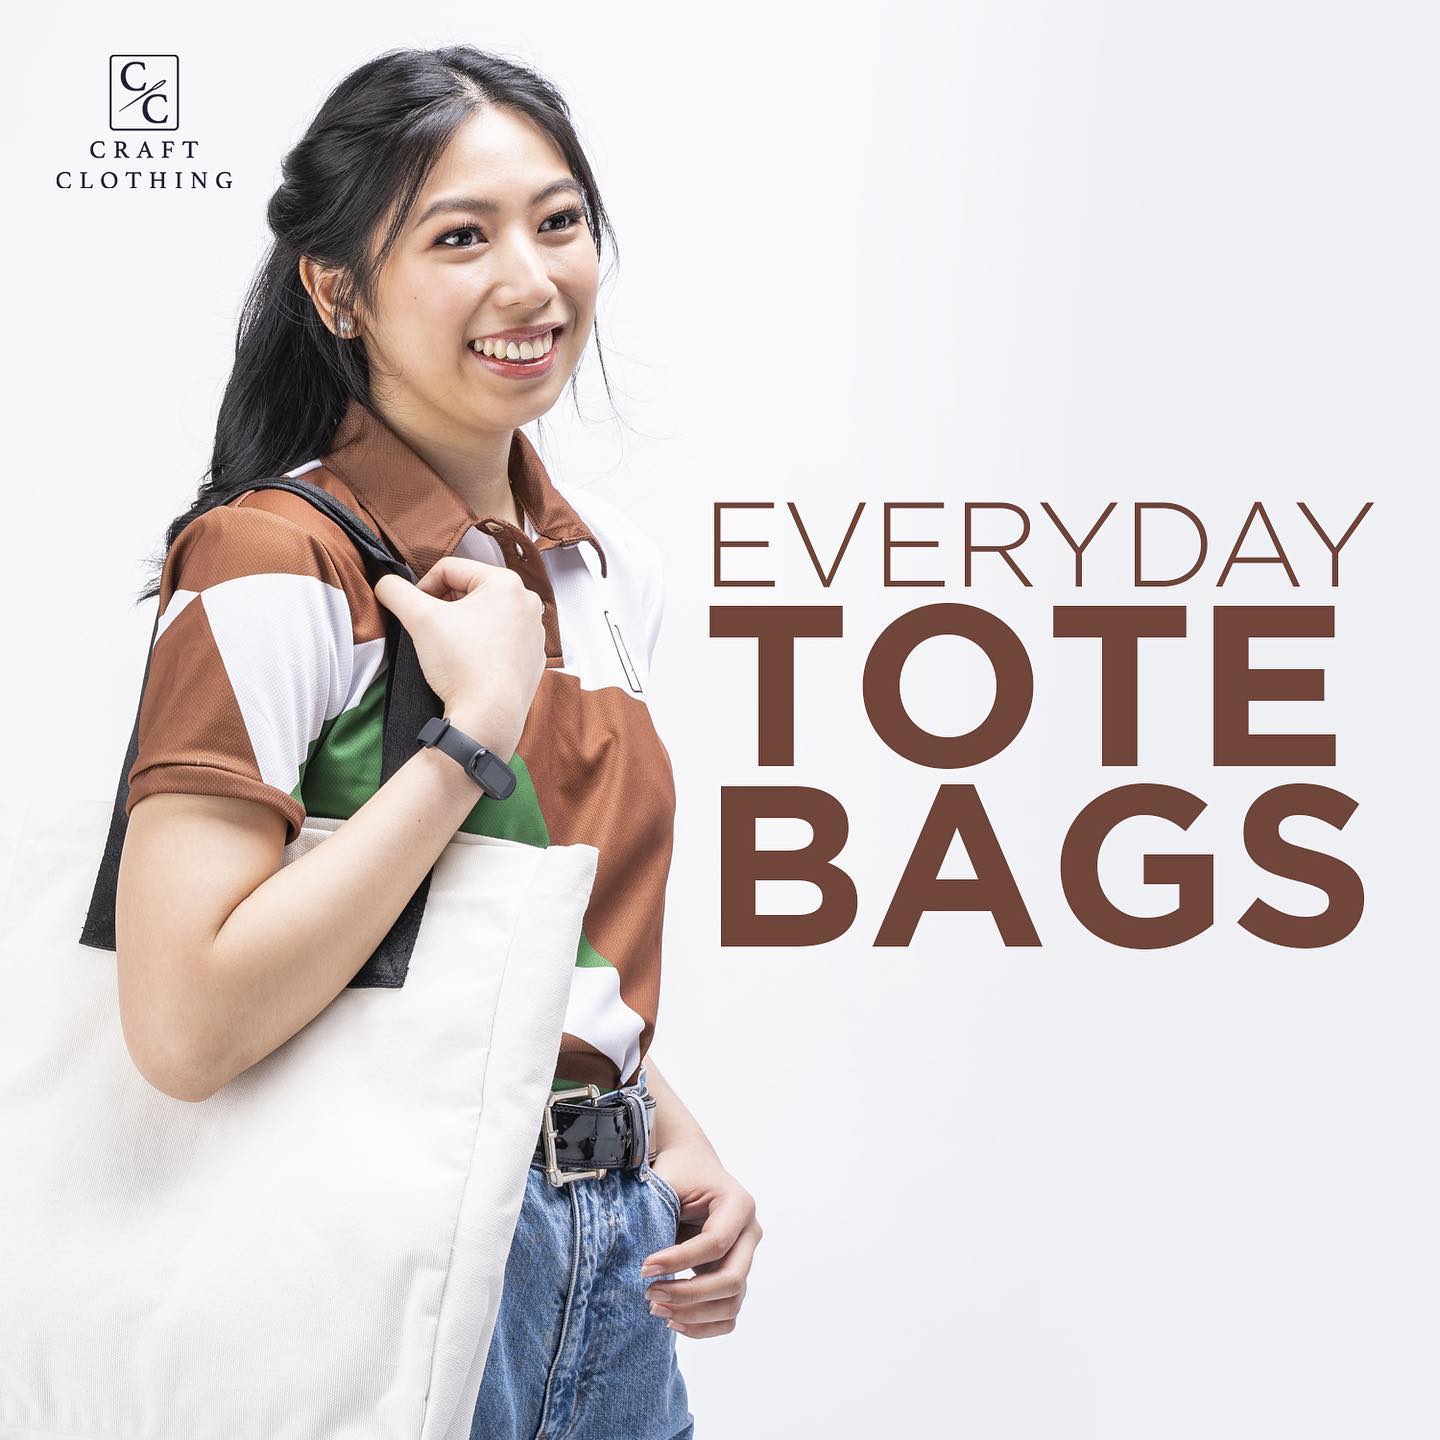 Everyday Tote Bags